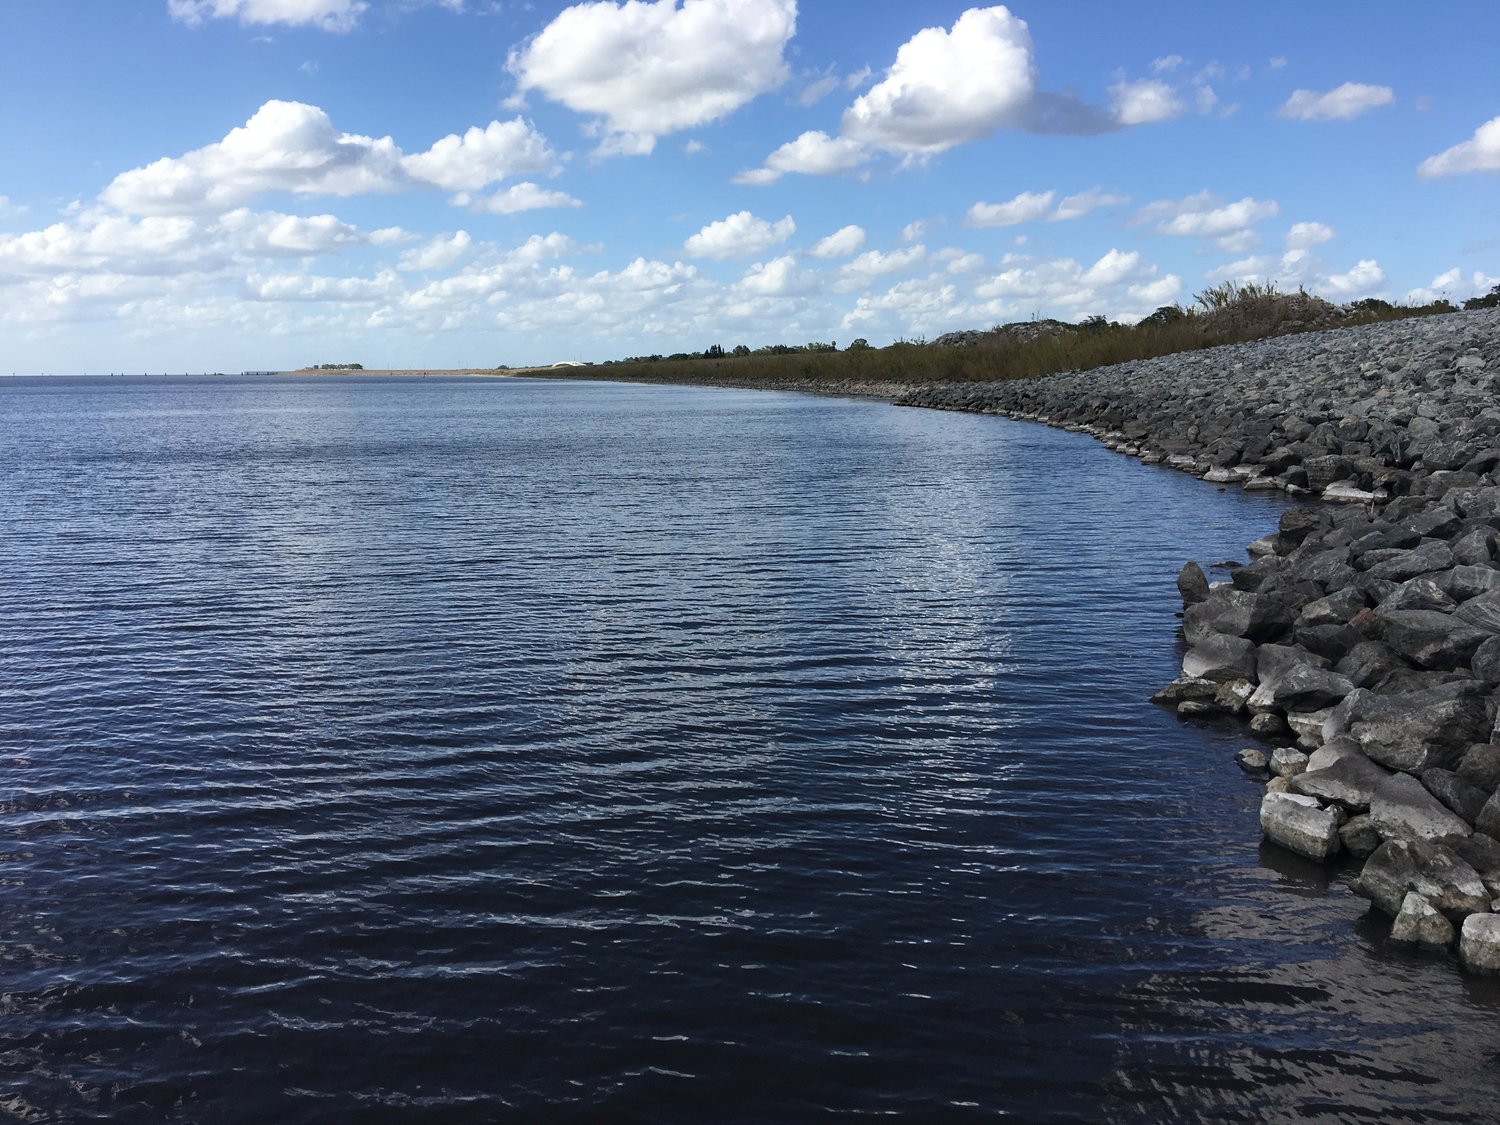 LAKE OKEECHOBEE — Heavy rainfall in recent weeks has brought water pouring into Lake Okeechobee from the north about 10 times faster than it has been released to the south, causing the lake level to rise rapidly.